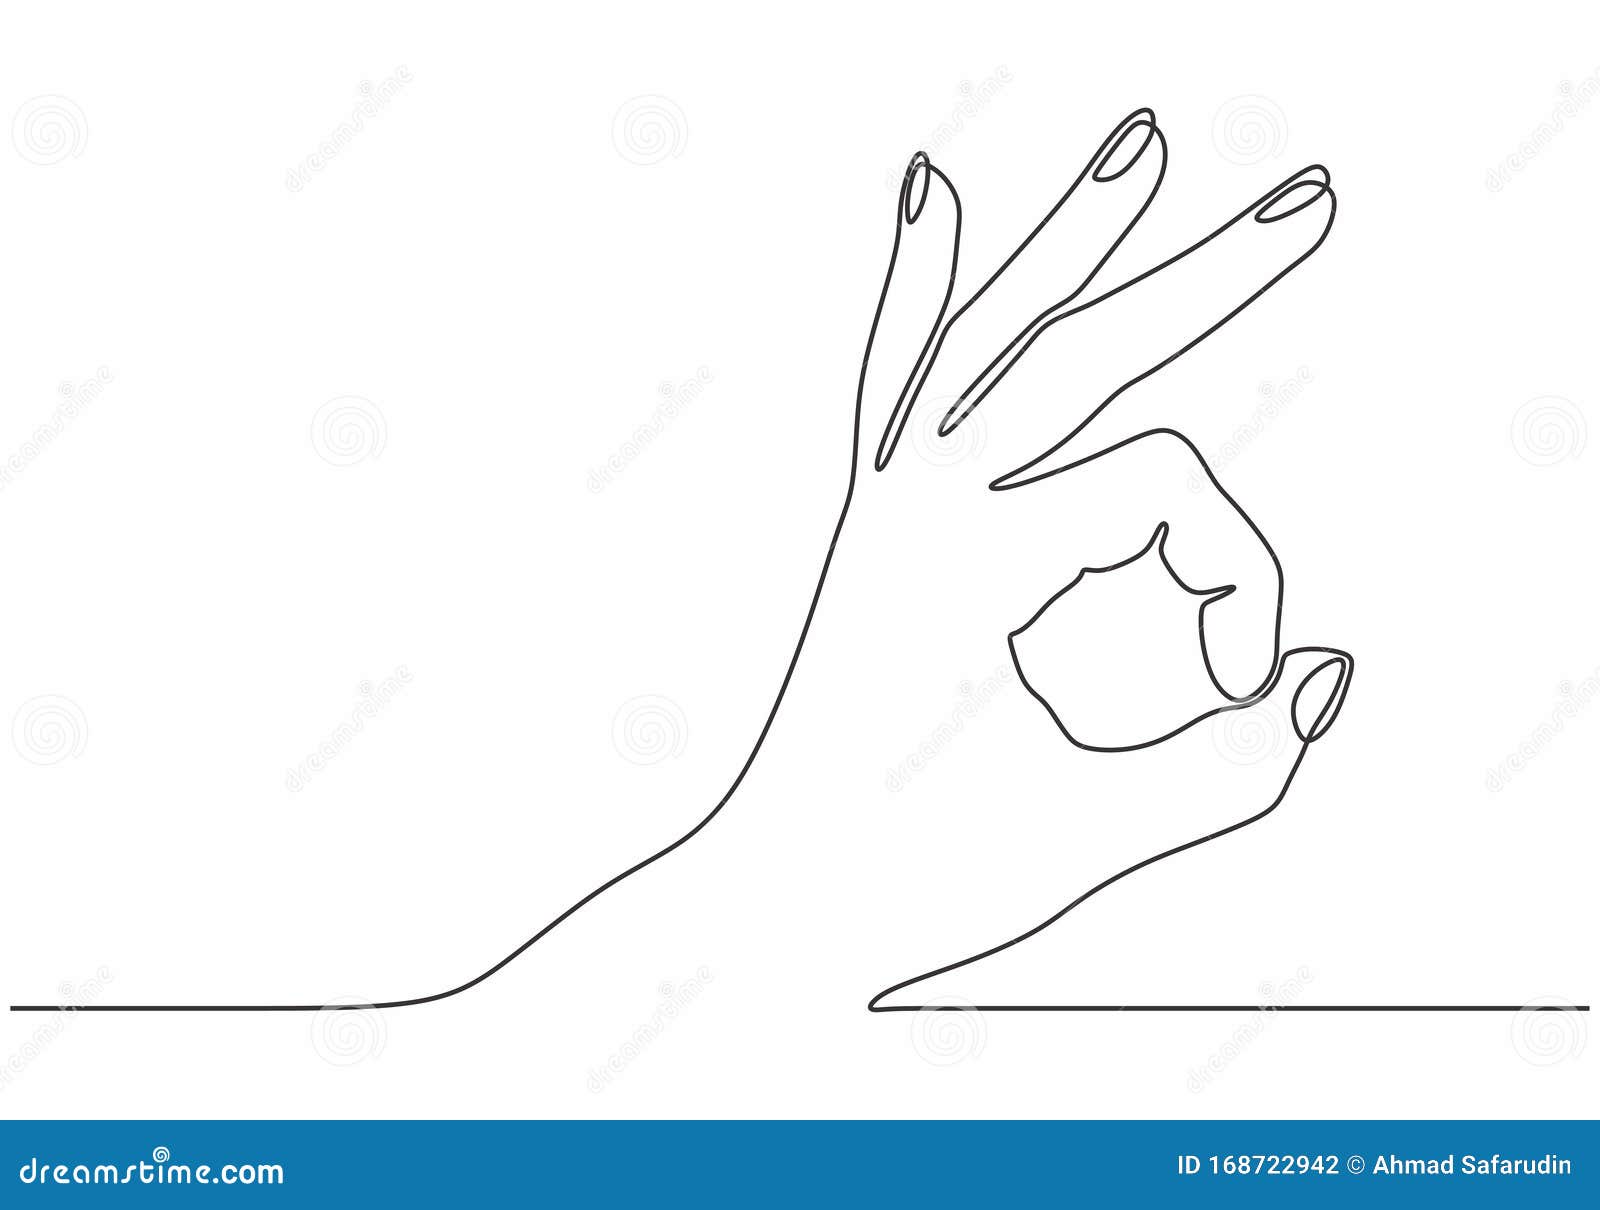 one line drawing of hand showing ok gesture. contour hand drawn single lineart minimalism continuous style